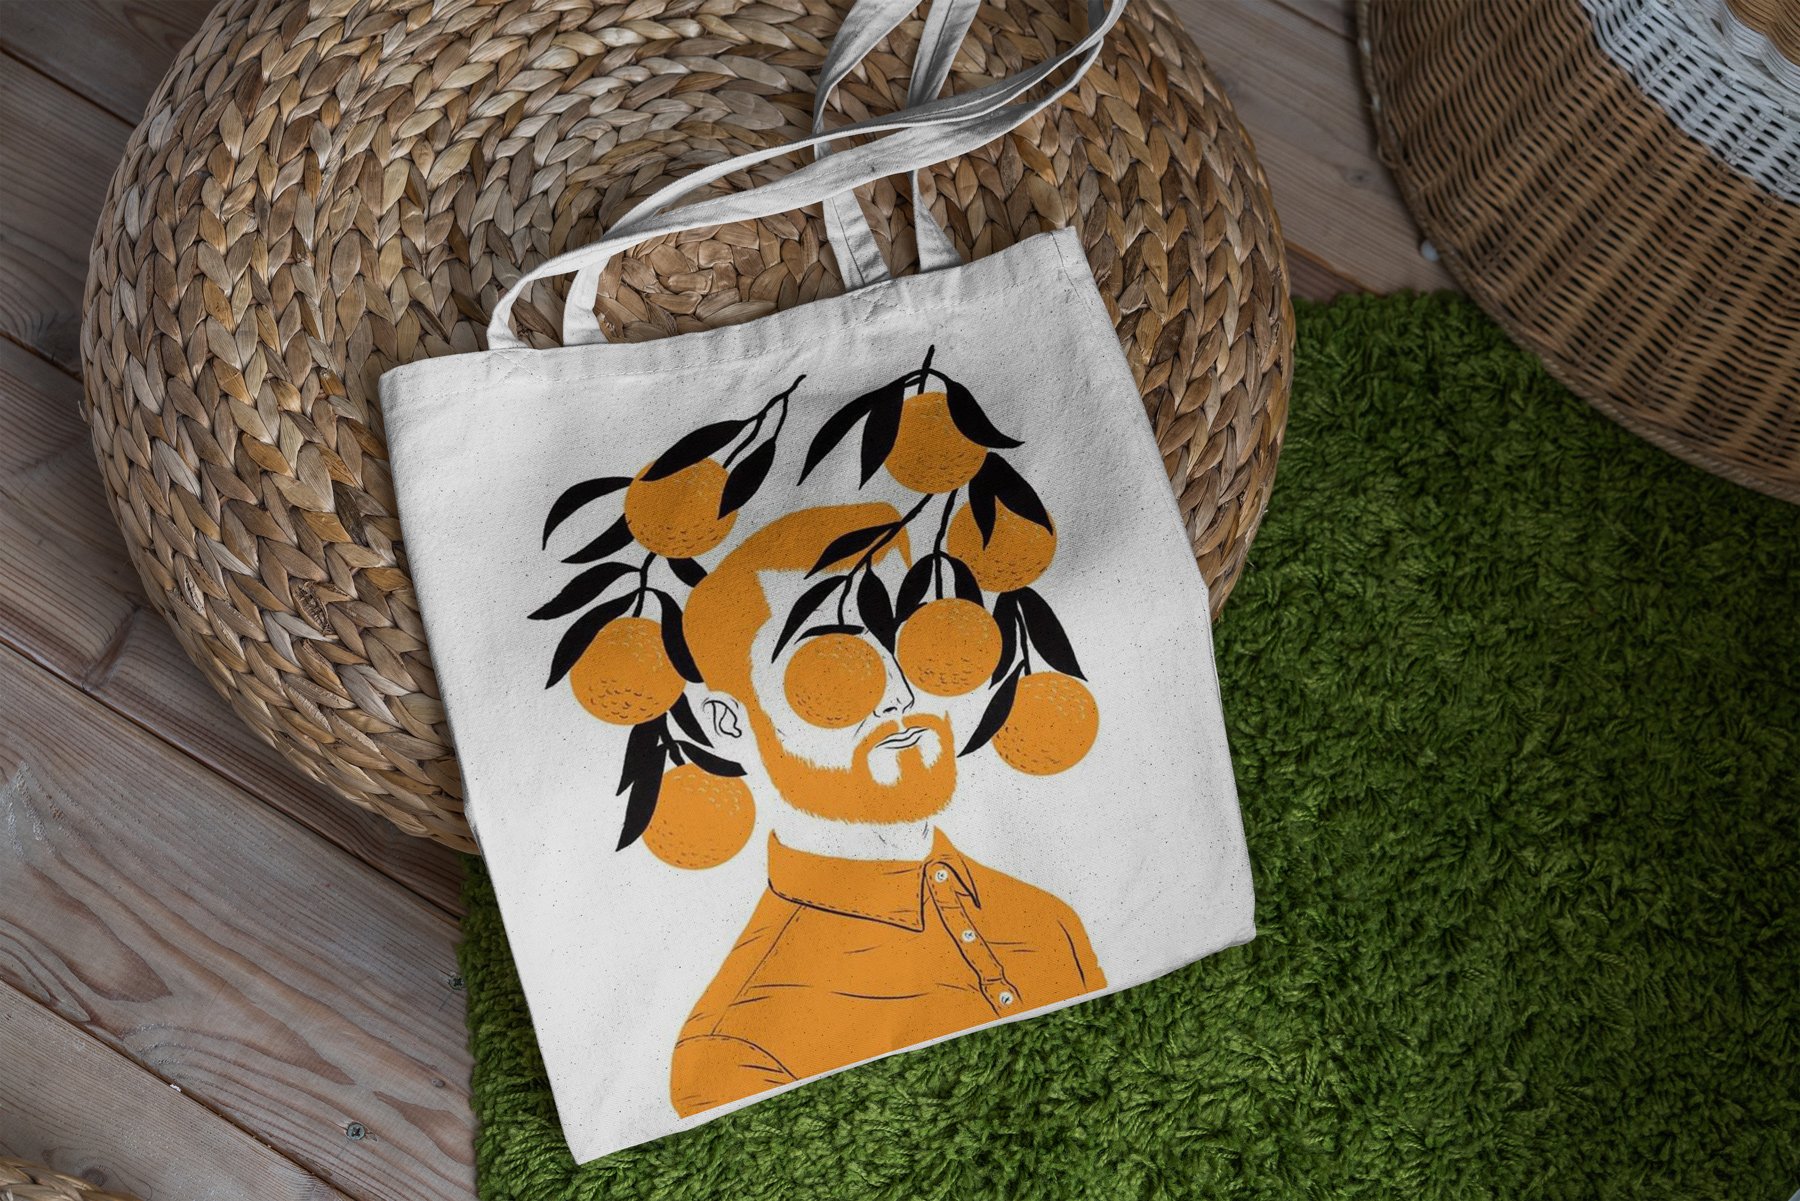 Canvas Tote Bag Mock-Up Lifestyle